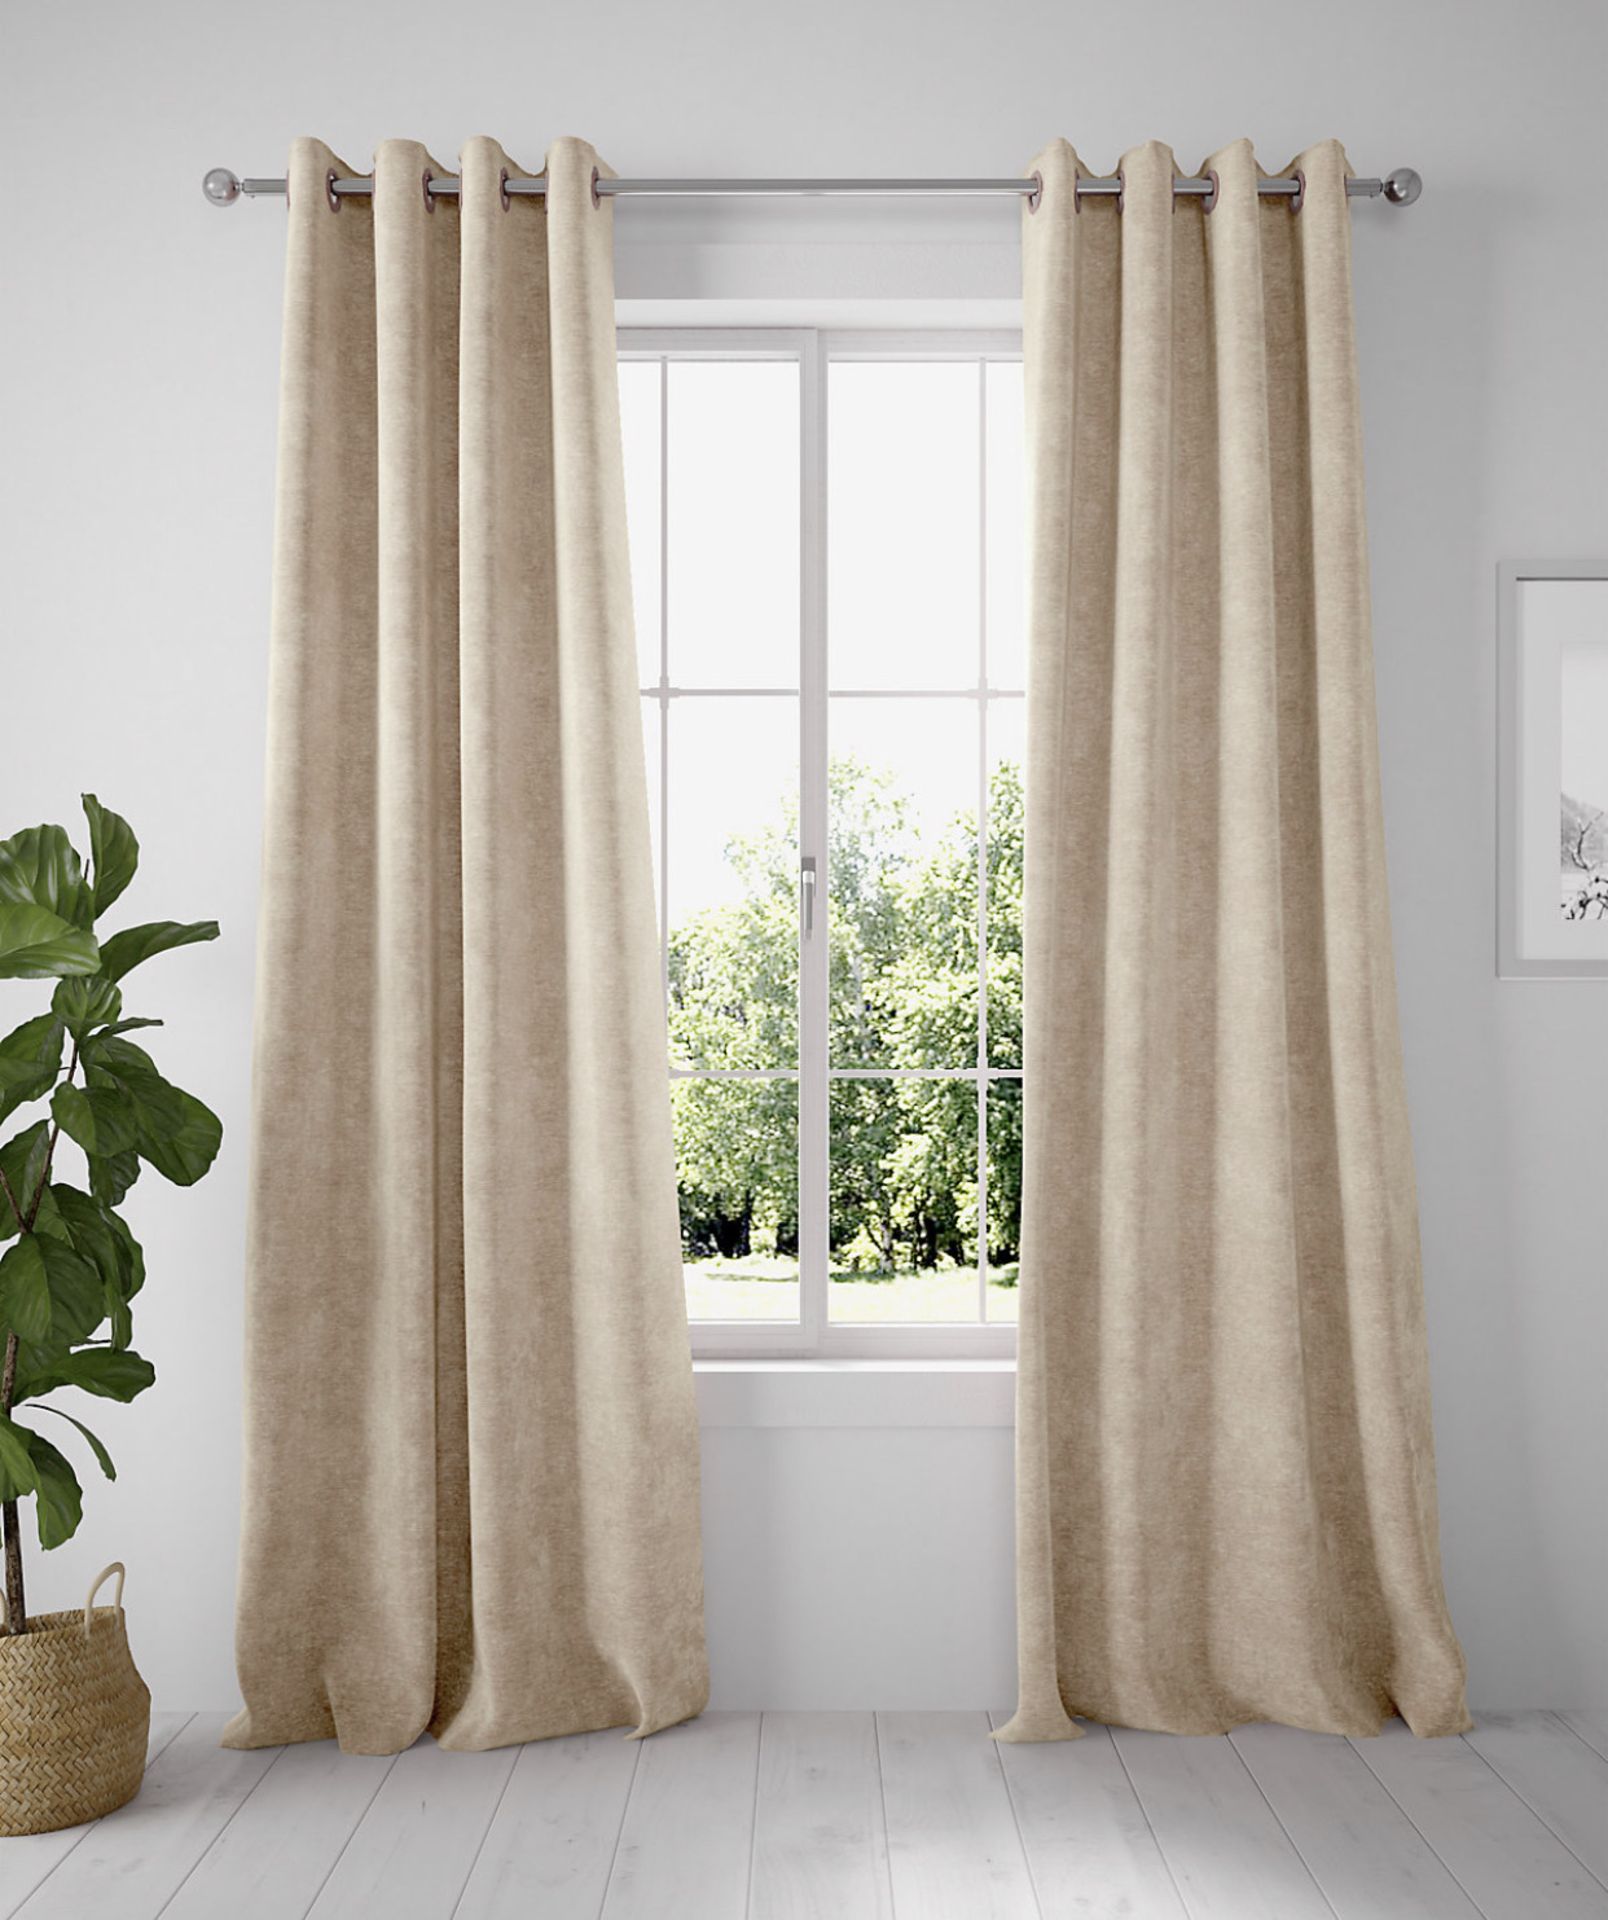 Chenille Eyelet Curtains RRP £109